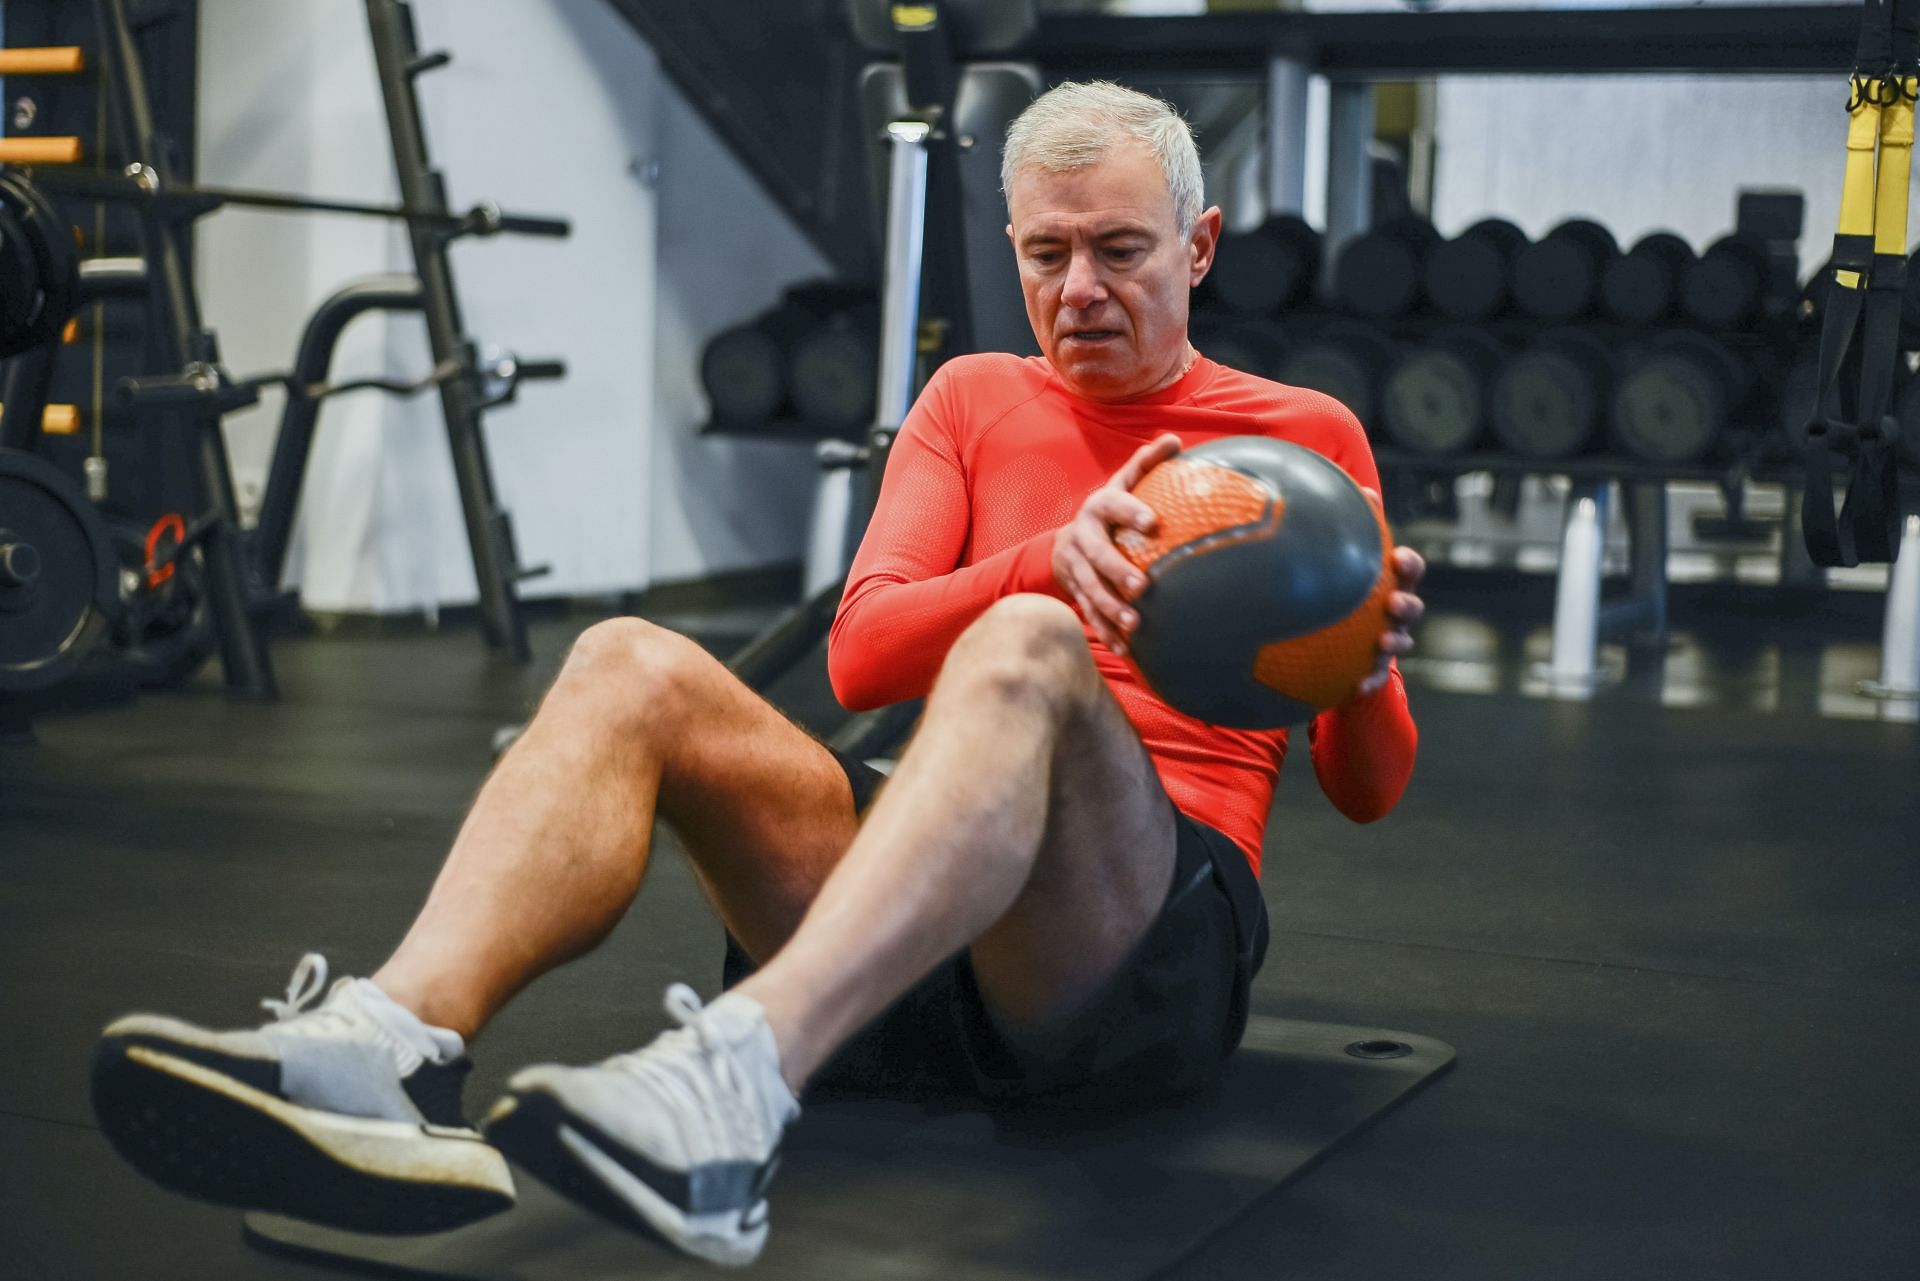 Seniors can benefit from core exercises to prevent falls, reduce back pain (Image via Pexels/Kampus production)